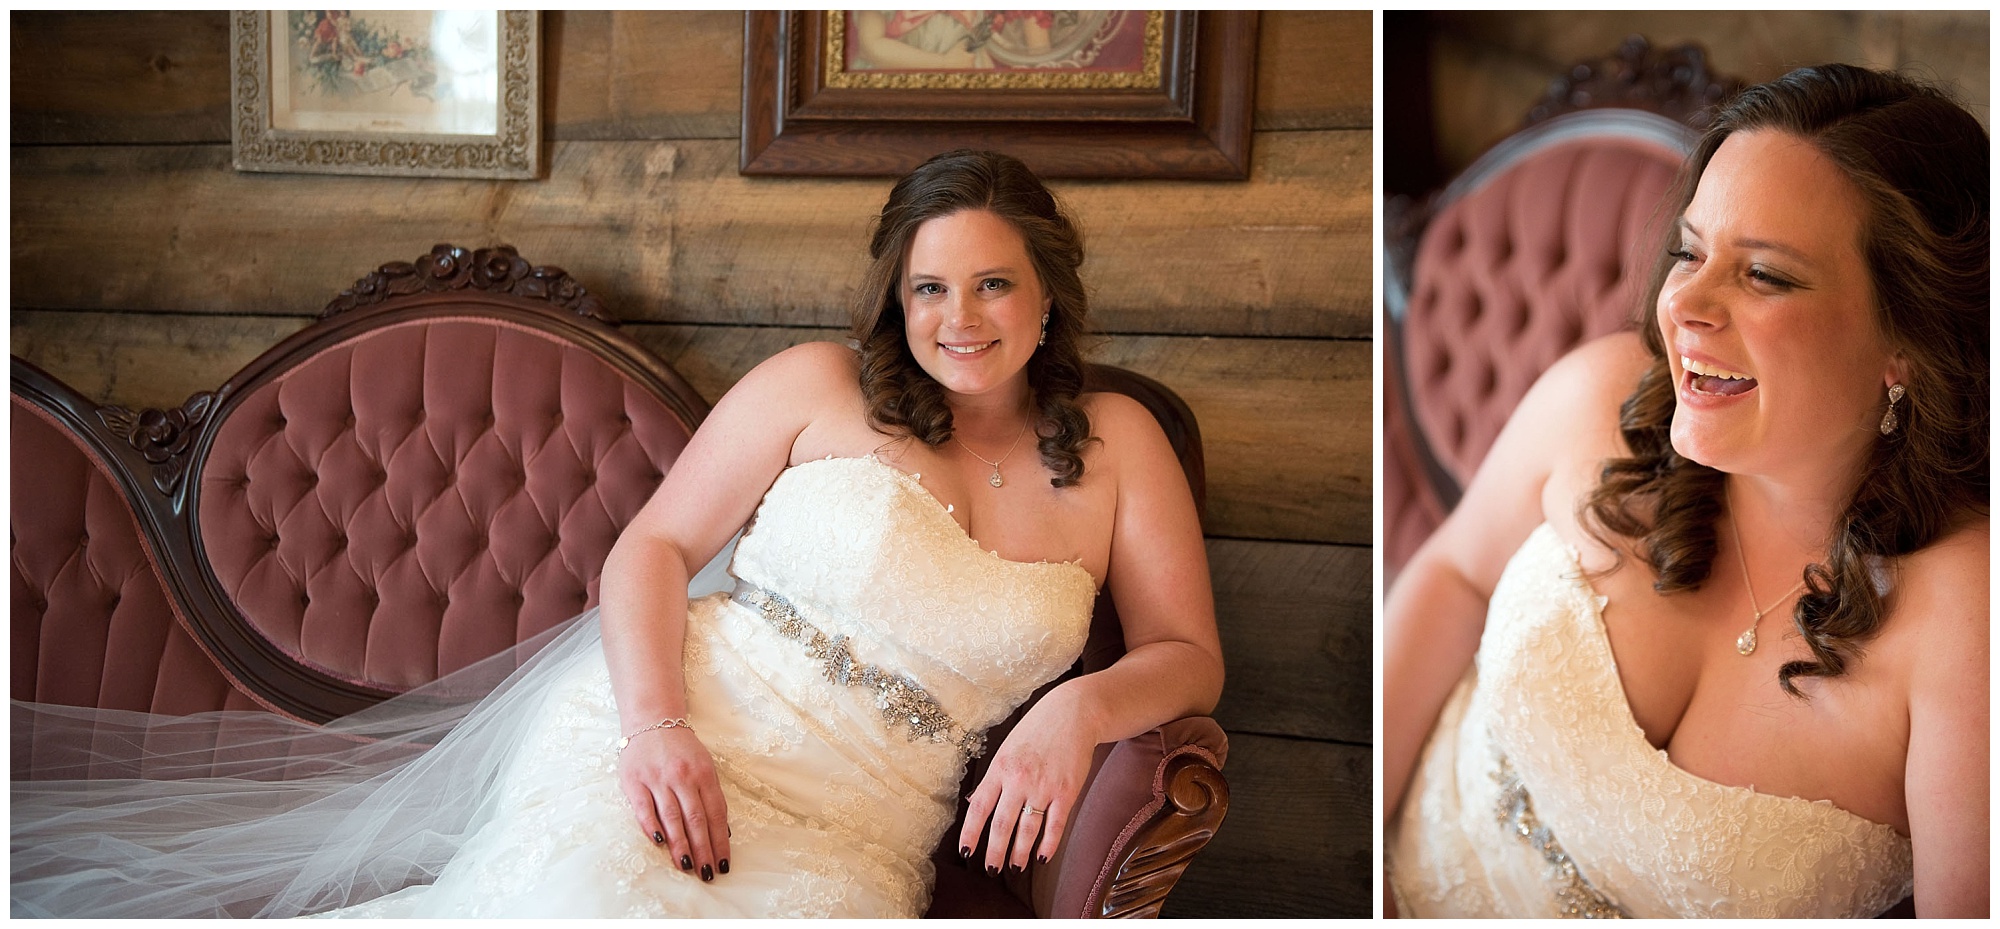 Two photos of a bride posed on an antique sofa.